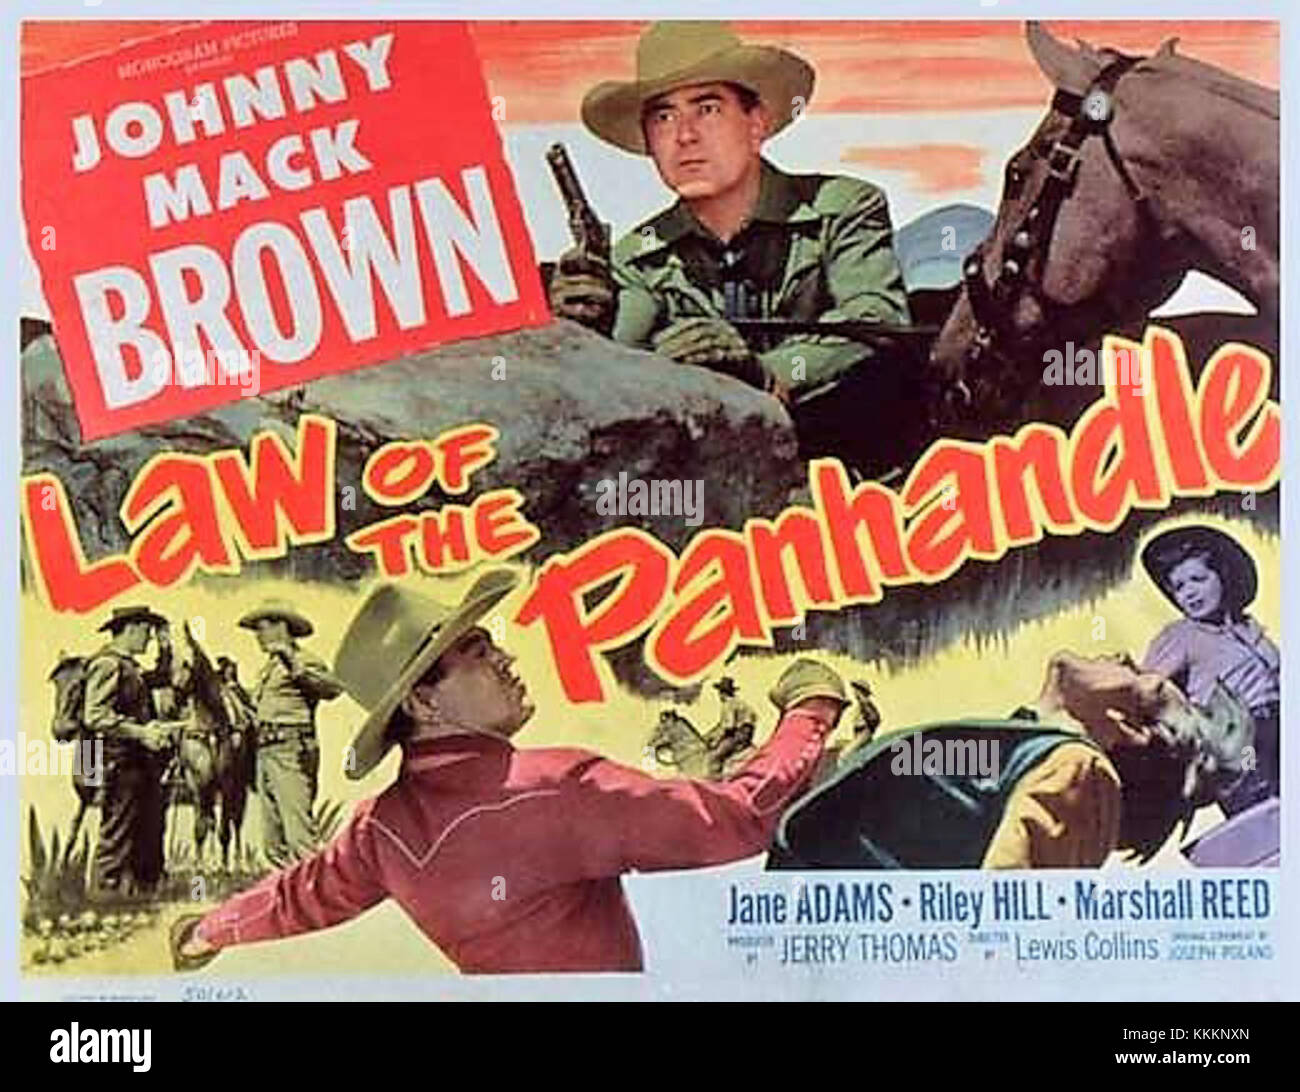 LLaw of the Panhandle 1950 Poster Stockfoto